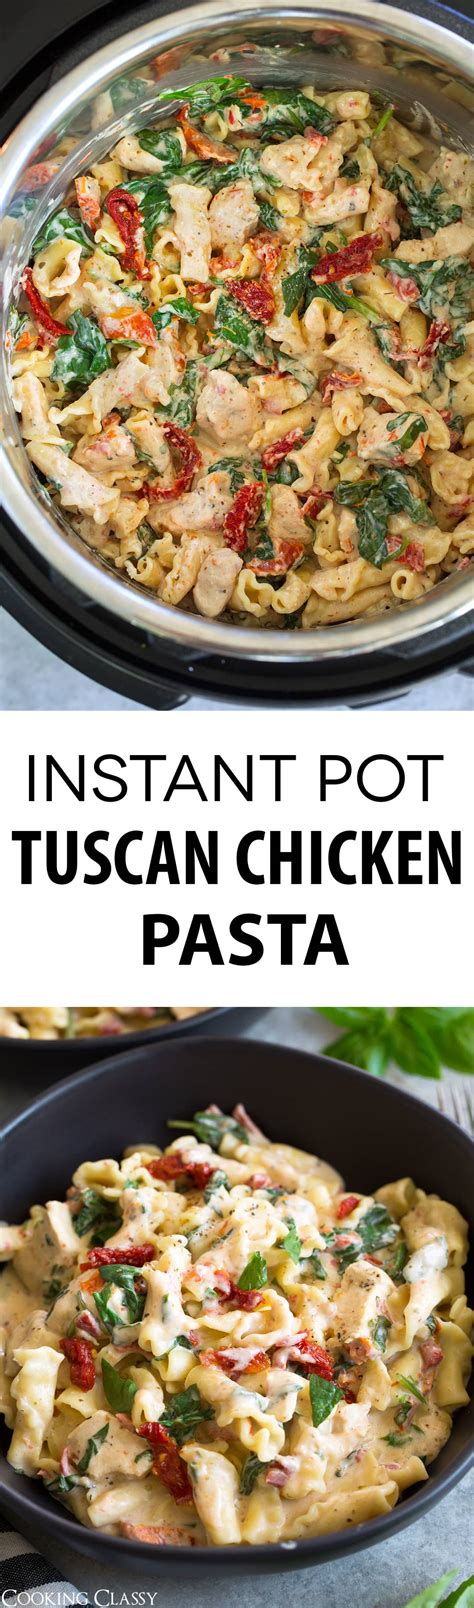 This tuscan chicken pasta recipe from delish.com is the best. Instant Pot Creamy Tuscan Chicken Pasta - Cooking Classy